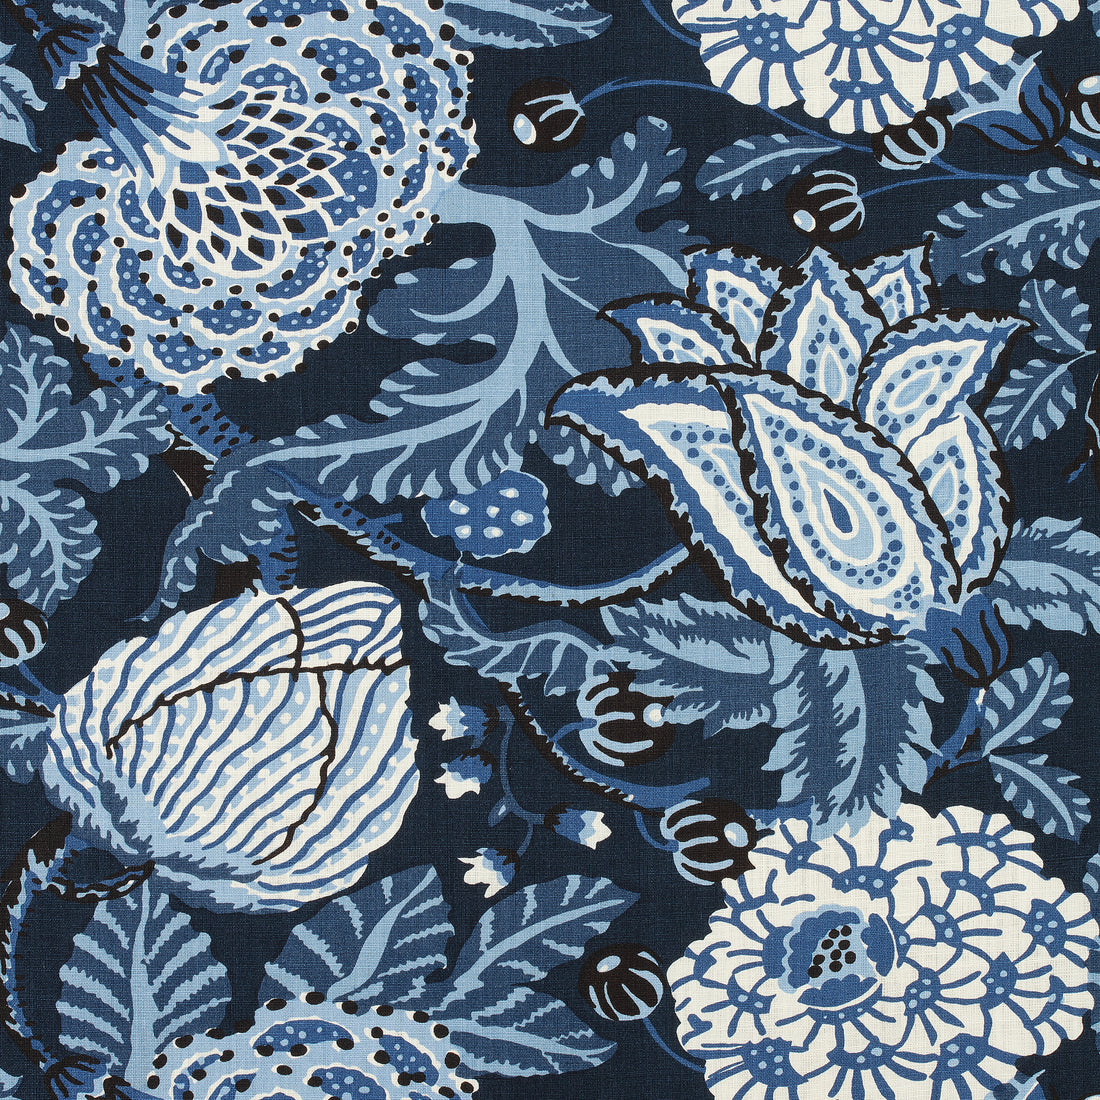 Mitford fabric in navy color - pattern number F92943 - by Thibaut in the Paramount collection